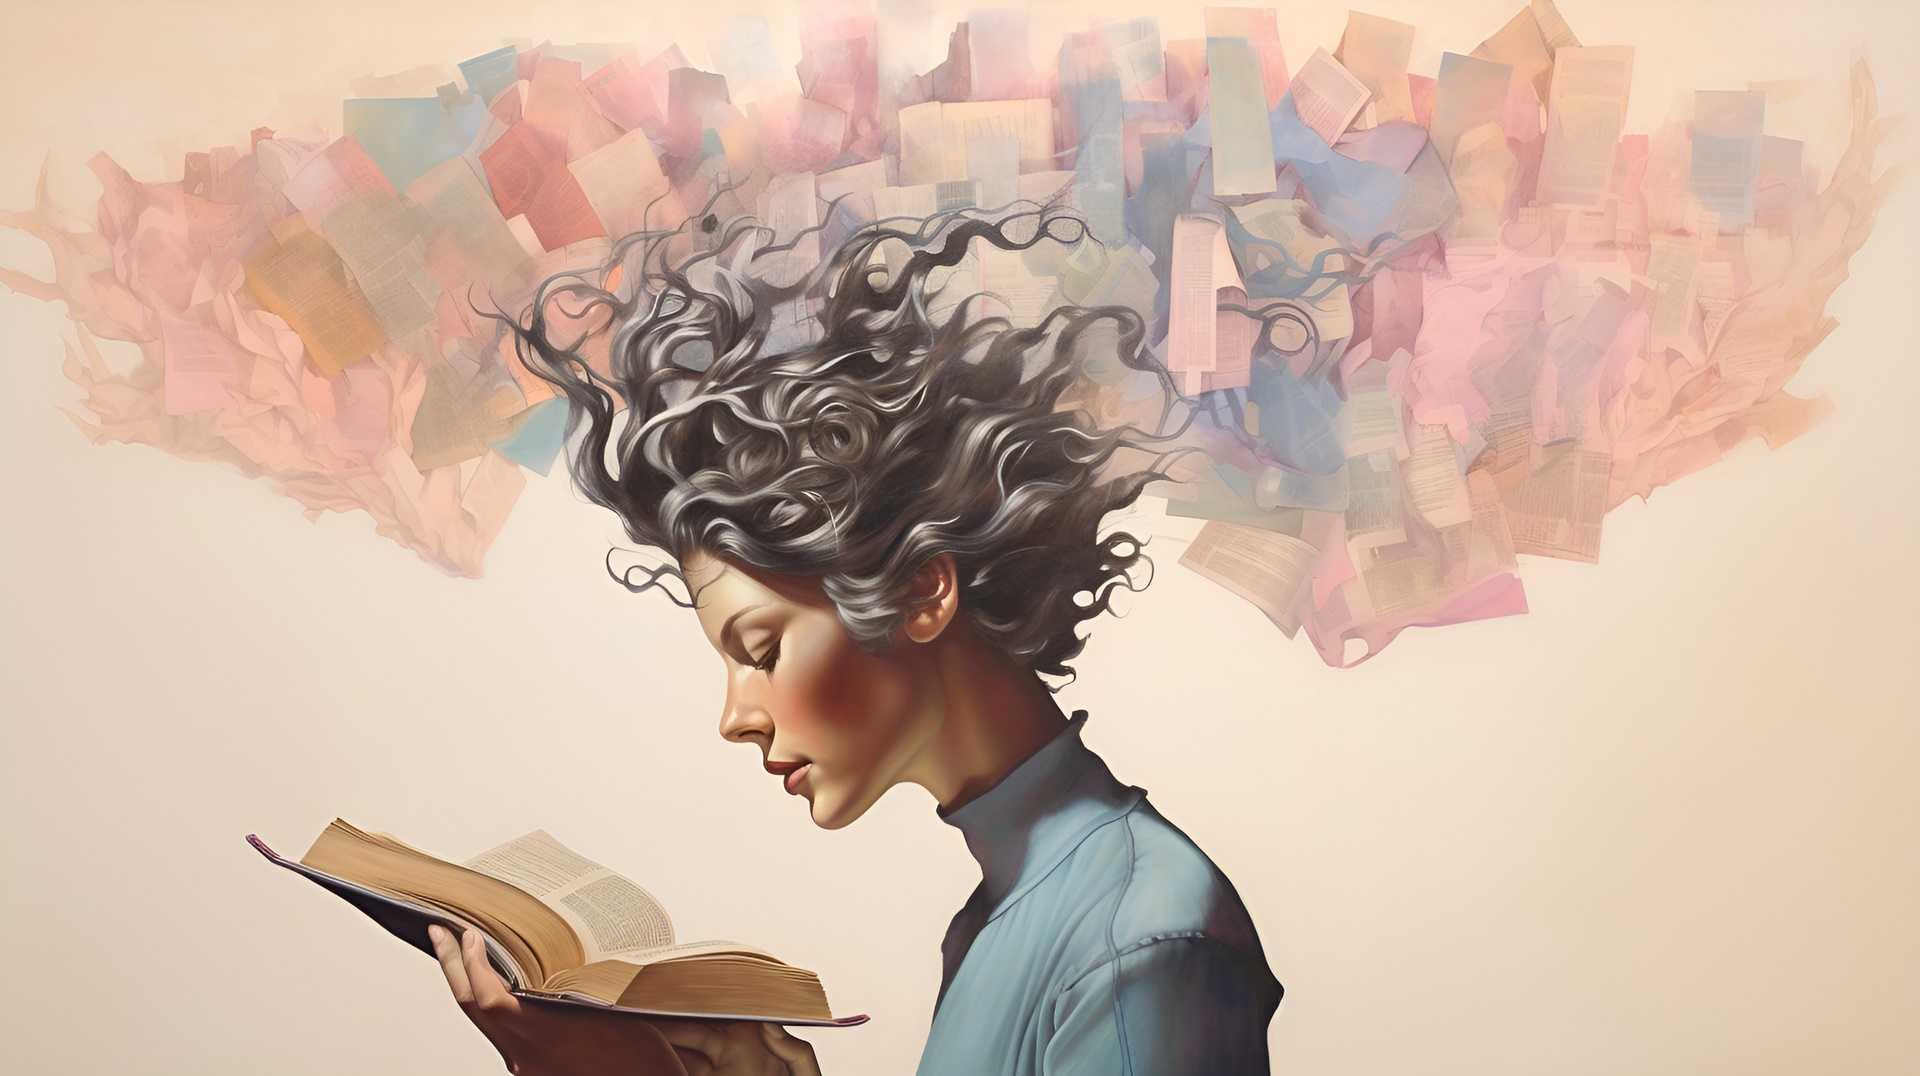 Benefits of Reading: Does Reading Make You Smarter? Image